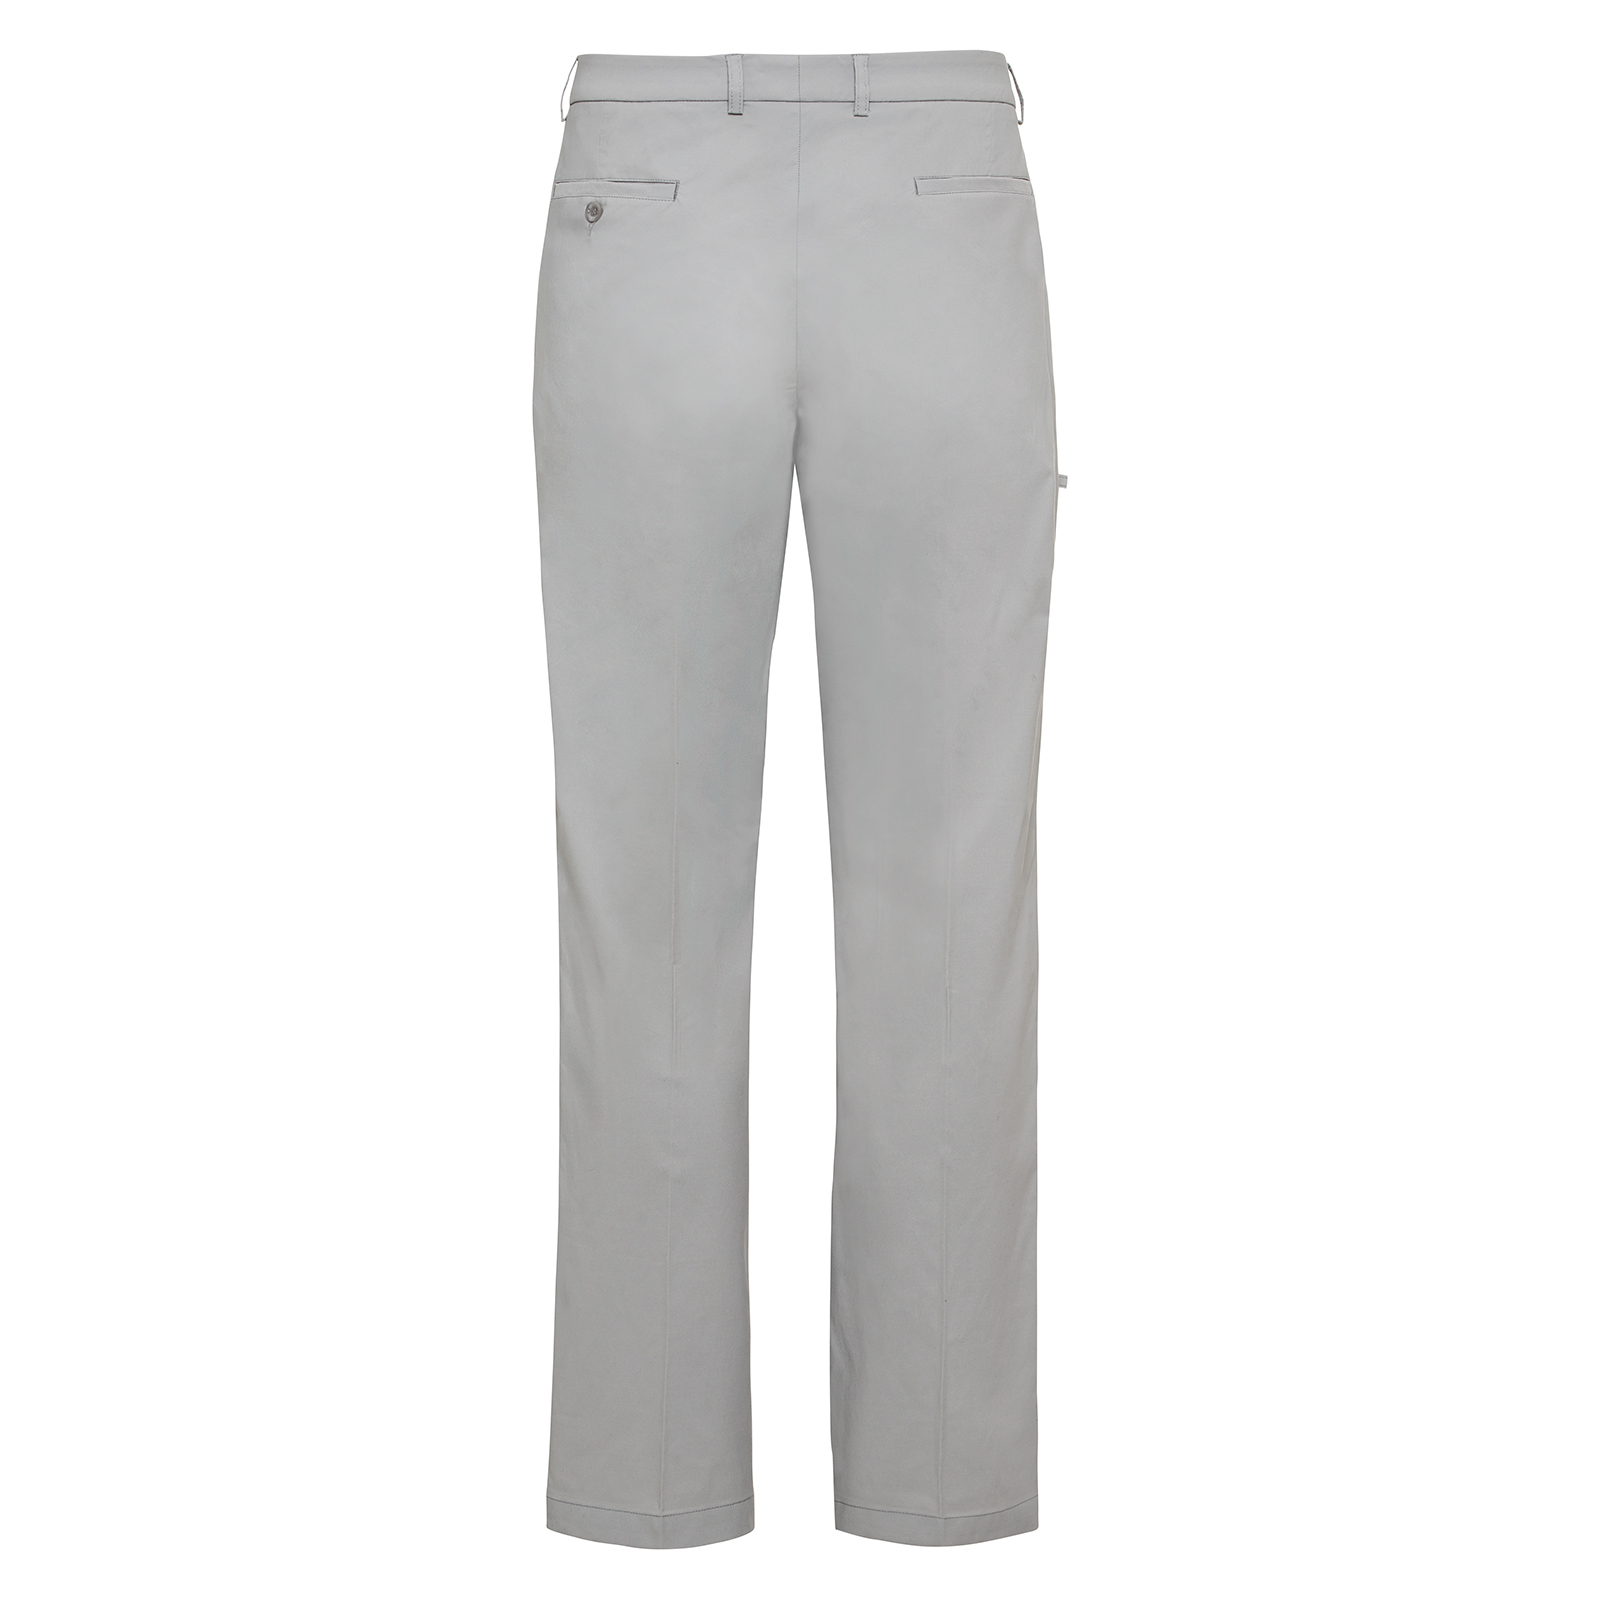 Men's practical and versatile golf trousers